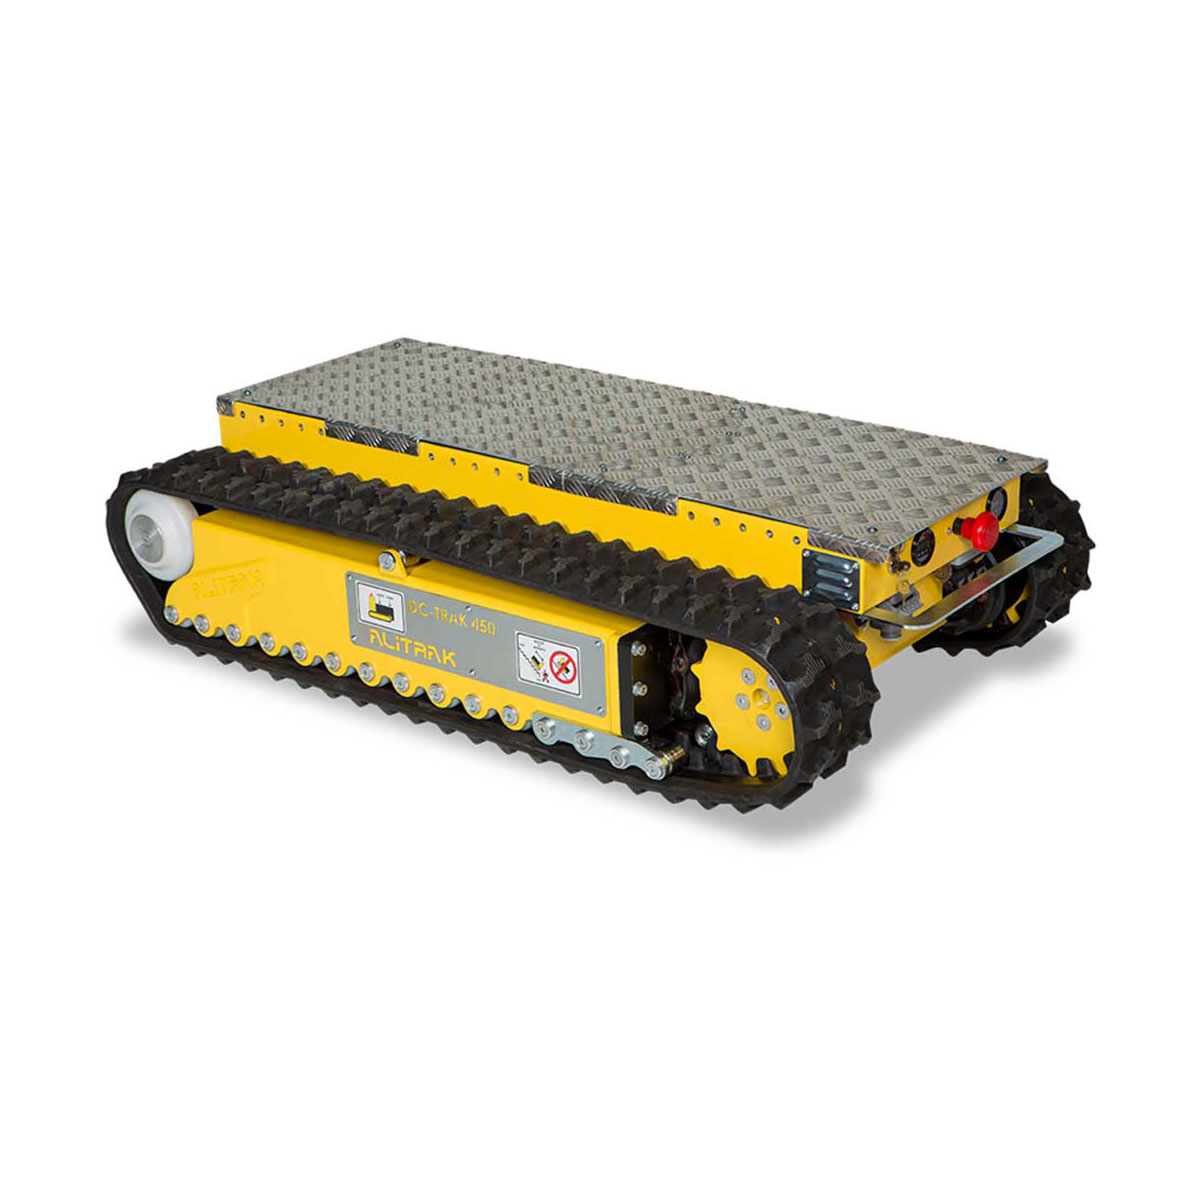 Buy Electric Transporter - Remote in Electric Transporter from Alitrak available at Astrolift NZ